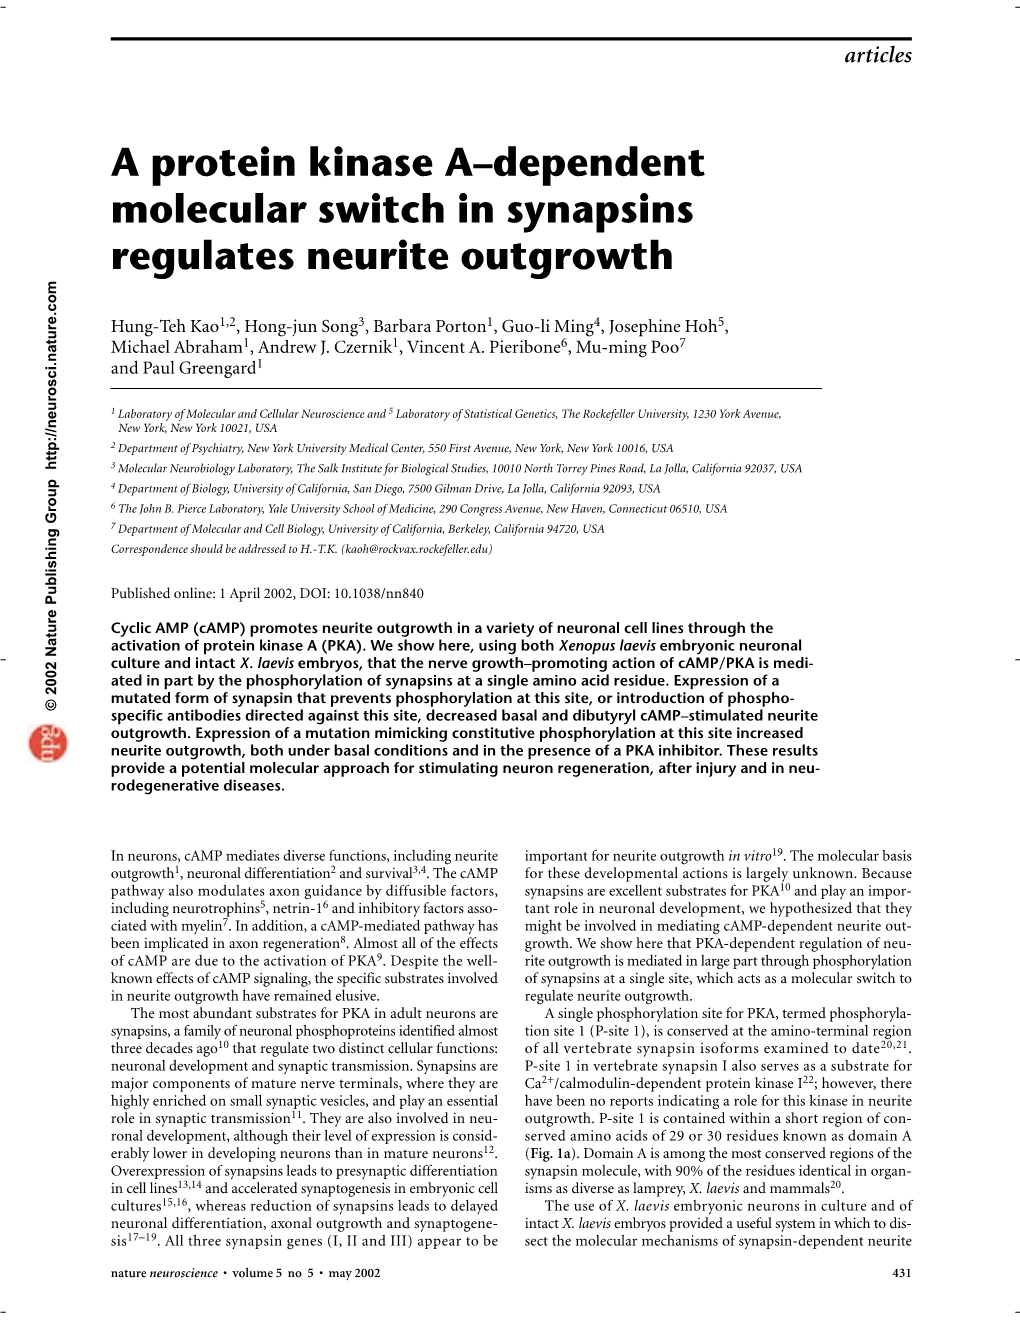 A Protein Kinase A–Dependent Molecular Switch in Synapsins Regulates Neurite Outgrowth